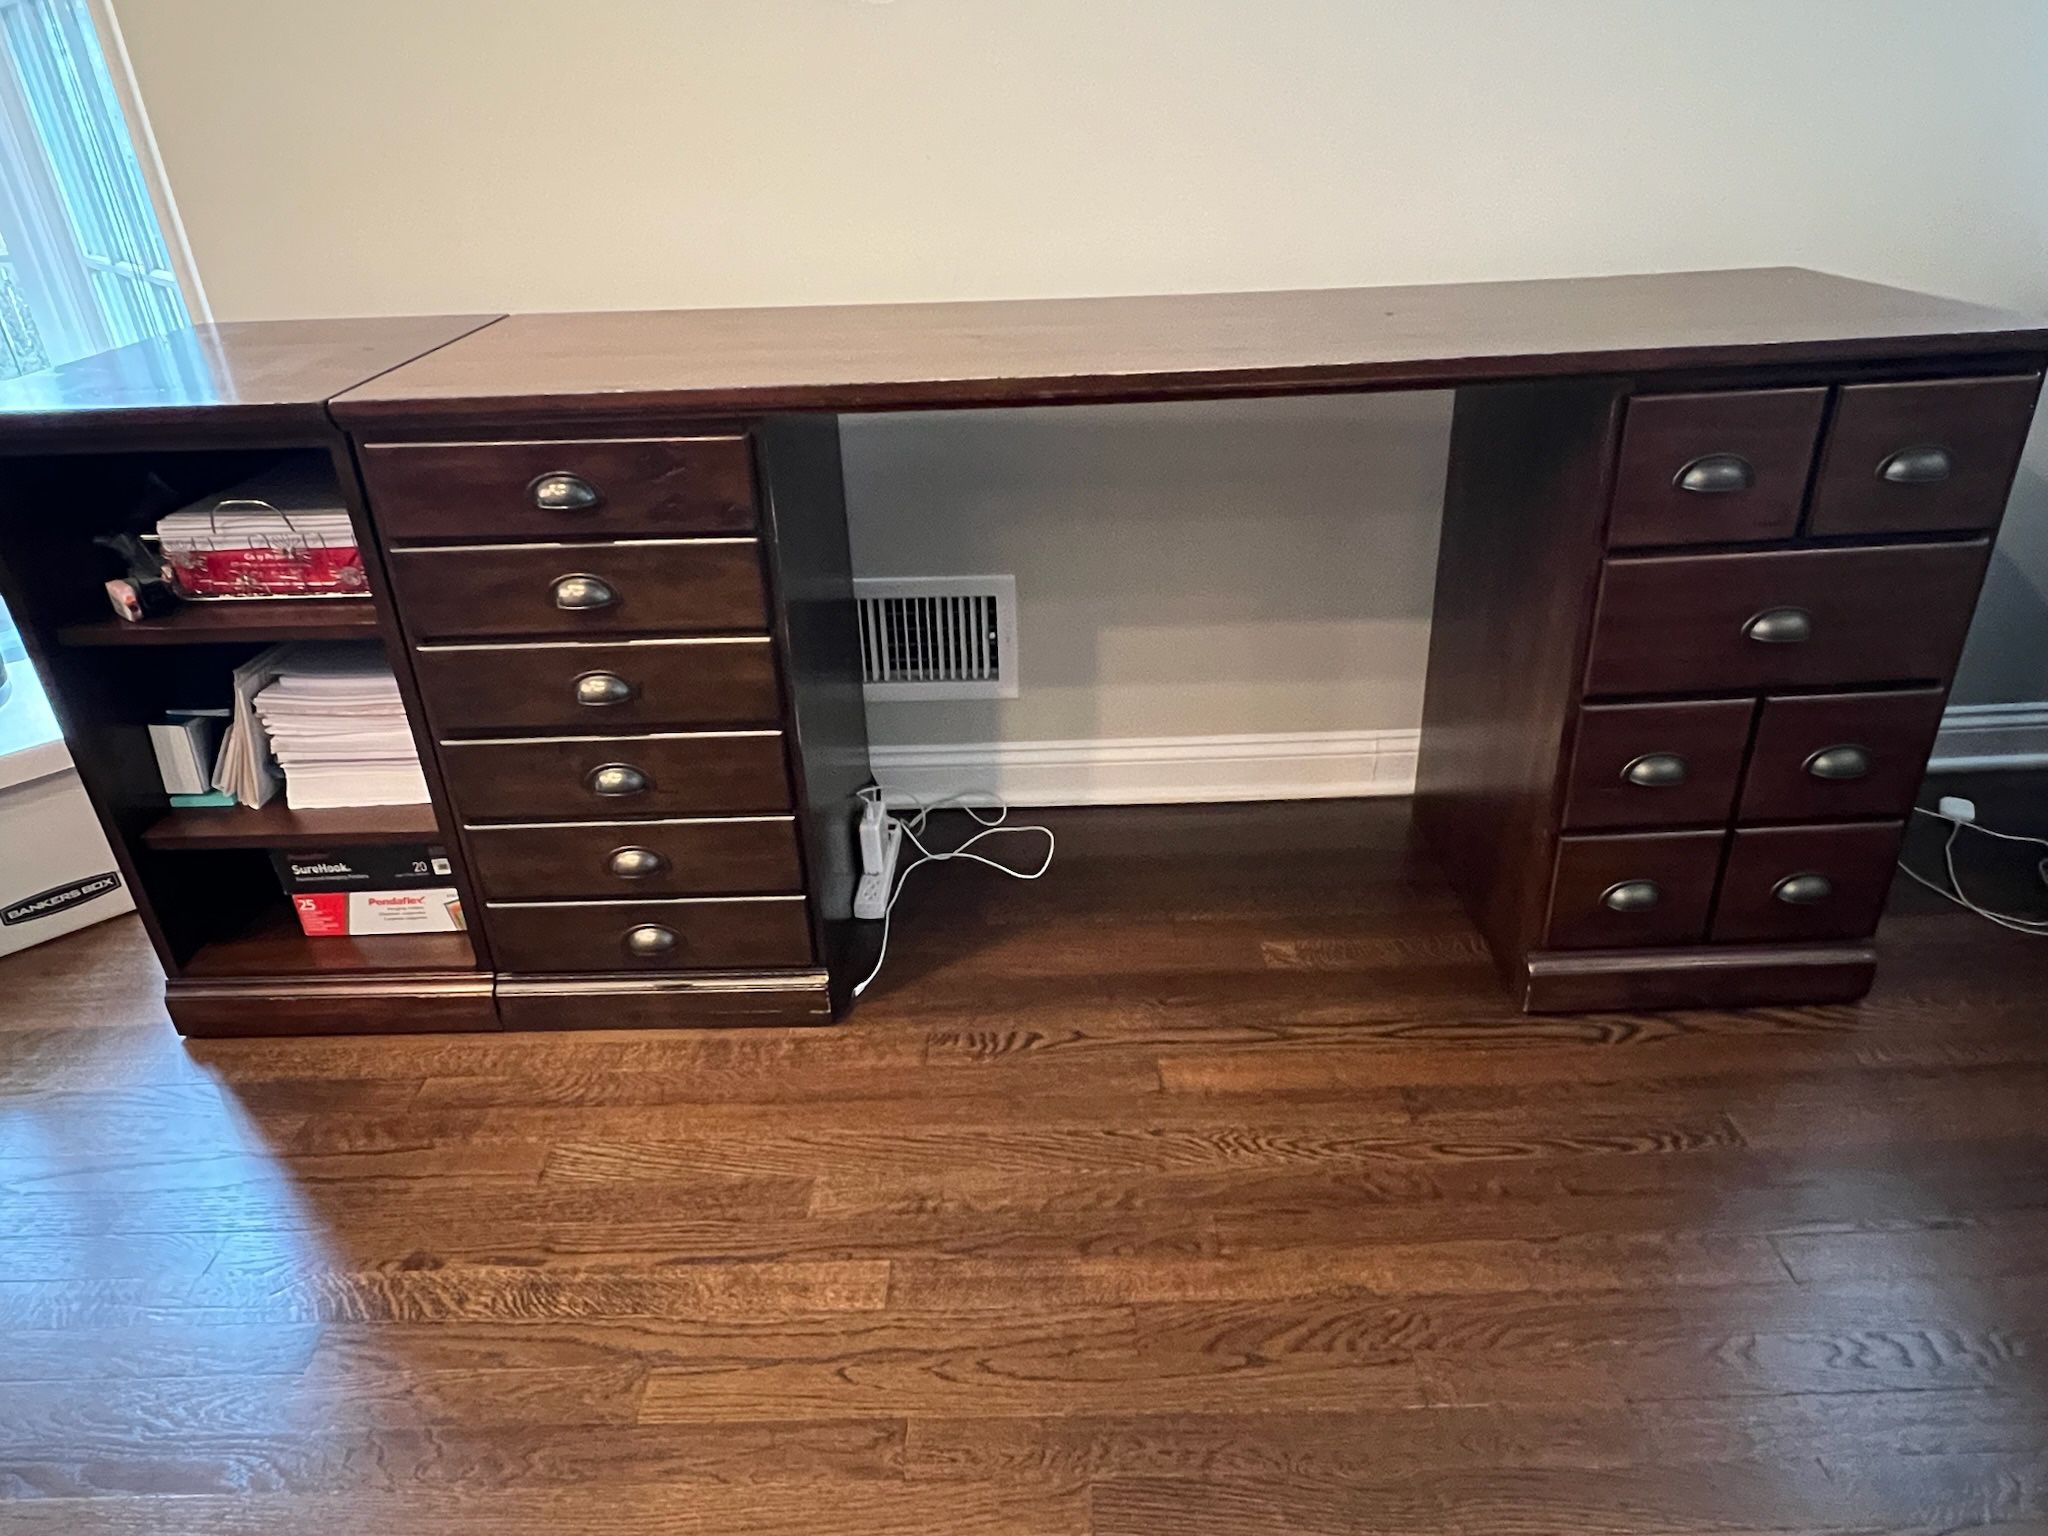 Pottery Barn Desk & Matching Shelf In Good Condition.